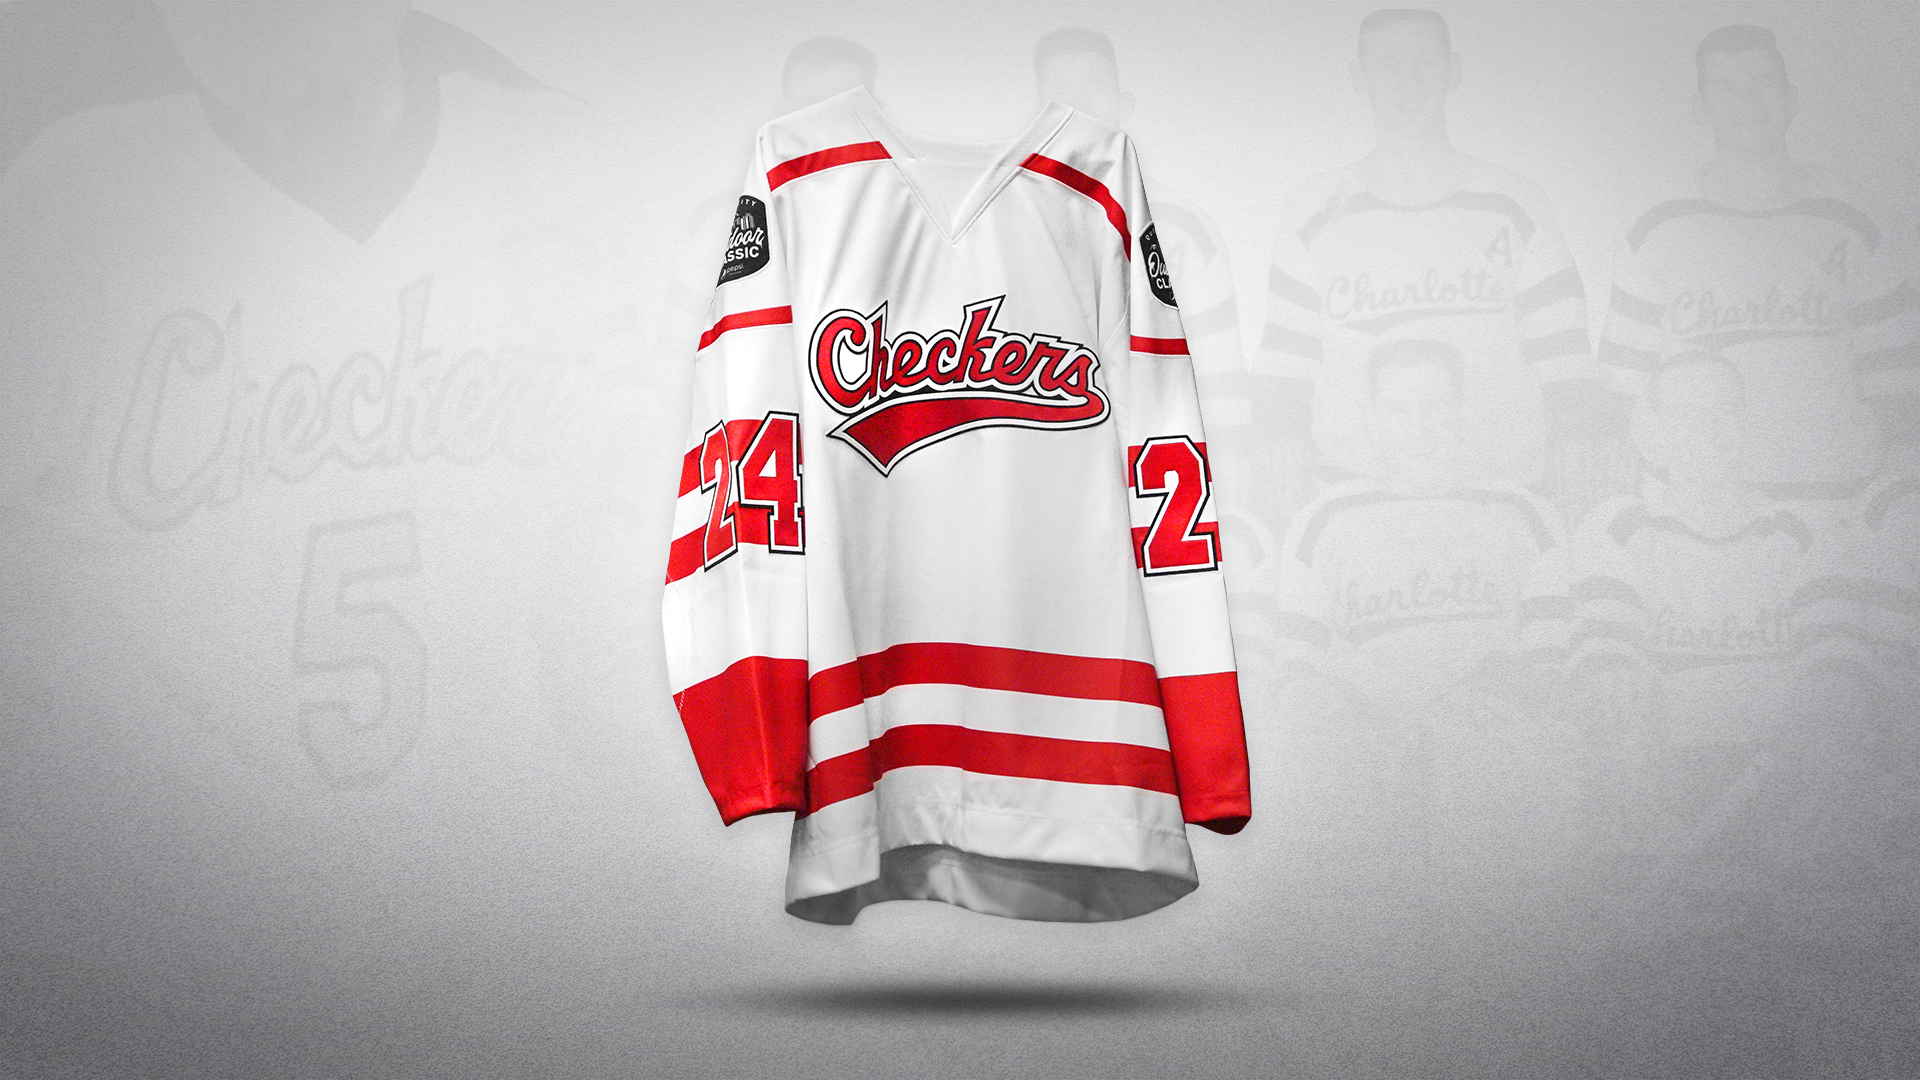 Charlotte Checkers Chad McIver Jersey